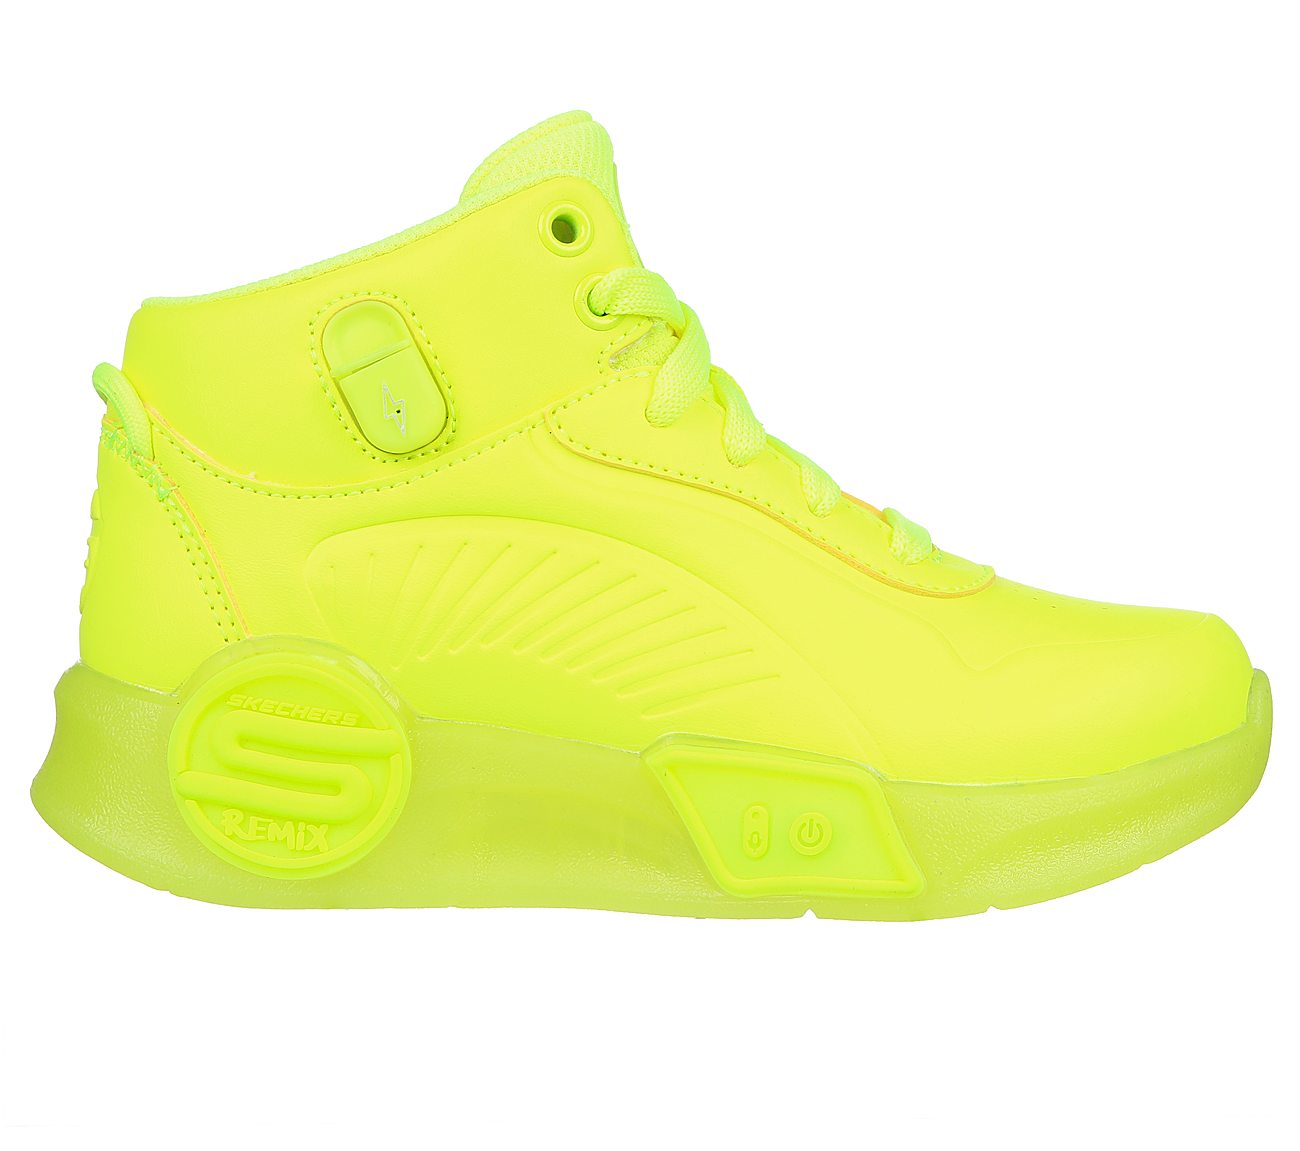 S-LIGHTS REMIX, NEON/YELLOW Footwear Lateral View